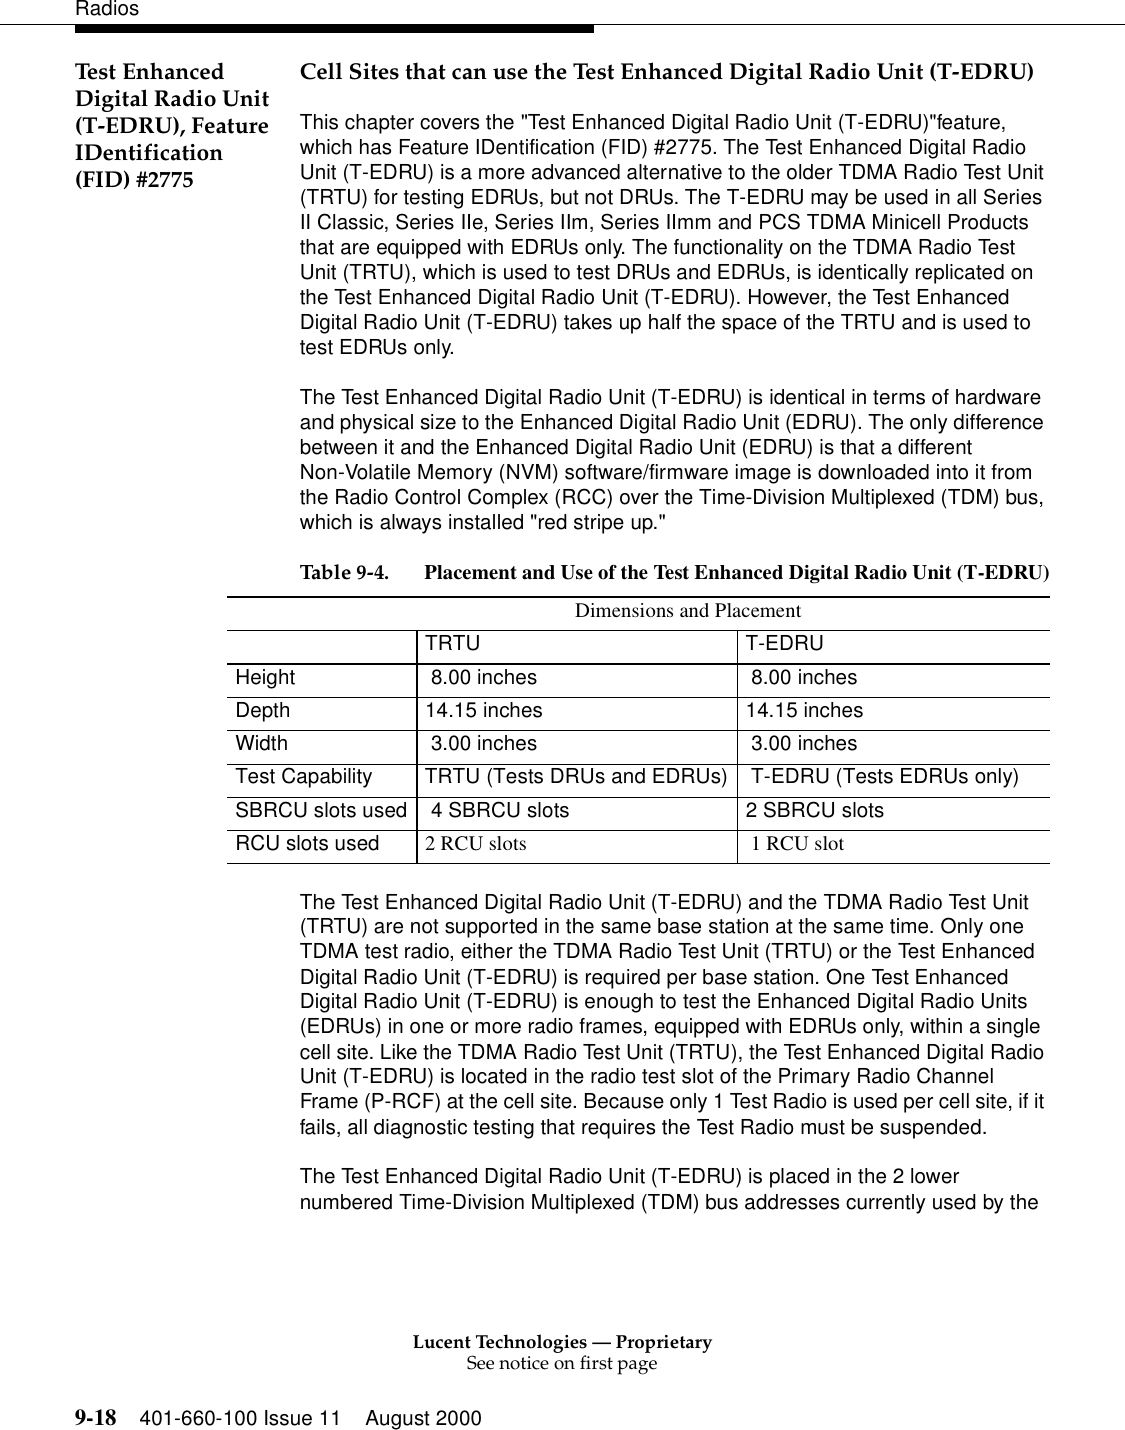 Lucent Technologies — ProprietarySee notice on first page9-18 401-660-100 Issue 11 August 2000RadiosTest Enhanced Digital Radio Unit (T-EDRU), Feature IDentification (FID) #2775Cell Sites that can use the Test Enhanced Digital Radio Unit (T-EDRU)This chapter covers the &quot;Test Enhanced Digital Radio Unit (T-EDRU)&quot;feature, which has Feature IDentification (FID) #2775. The Test Enhanced Digital Radio Unit (T-EDRU) is a more advanced alternative to the older TDMA Radio Test Unit (TRTU) for testing EDRUs, but not DRUs. The T-EDRU may be used in all Series II Classic, Series IIe, Series IIm, Series IImm and PCS TDMA Minicell Products that are equipped with EDRUs only. The functionality on the TDMA Radio Test Unit (TRTU), which is used to test DRUs and EDRUs, is identically replicated on the Test Enhanced Digital Radio Unit (T-EDRU). However, the Test Enhanced Digital Radio Unit (T-EDRU) takes up half the space of the TRTU and is used to test EDRUs only. The Test Enhanced Digital Radio Unit (T-EDRU) is identical in terms of hardware and physical size to the Enhanced Digital Radio Unit (EDRU). The only difference between it and the Enhanced Digital Radio Unit (EDRU) is that a different Non-Volatile Memory (NVM) software/firmware image is downloaded into it from the Radio Control Complex (RCC) over the Time-Division Multiplexed (TDM) bus, which is always installed &quot;red stripe up.&quot;The Test Enhanced Digital Radio Unit (T-EDRU) and the TDMA Radio Test Unit (TRTU) are not supported in the same base station at the same time. Only one TDMA test radio, either the TDMA Radio Test Unit (TRTU) or the Test Enhanced Digital Radio Unit (T-EDRU) is required per base station. One Test Enhanced Digital Radio Unit (T-EDRU) is enough to test the Enhanced Digital Radio Units (EDRUs) in one or more radio frames, equipped with EDRUs only, within a single cell site. Like the TDMA Radio Test Unit (TRTU), the Test Enhanced Digital Radio Unit (T-EDRU) is located in the radio test slot of the Primary Radio Channel Frame (P-RCF) at the cell site. Because only 1 Test Radio is used per cell site, if it fails, all diagnostic testing that requires the Test Radio must be suspended. The Test Enhanced Digital Radio Unit (T-EDRU) is placed in the 2 lower numbered Time-Division Multiplexed (TDM) bus addresses currently used by the Table 9-4. Placement and Use of the Test Enhanced Digital Radio Unit (T-EDRU)Dimensions and Placement TRTU T-EDRUHeight   8.00 inches  8.00 inchesDepth 14.15 inches 14.15 inchesWidth  3.00 inches  3.00 inchesTest Capability TRTU (Tests DRUs and EDRUs)  T-EDRU (Tests EDRUs only)SBRCU slots used  4 SBRCU slots  2 SBRCU slots  RCU slots used 2 RCU slots  1 RCU slot